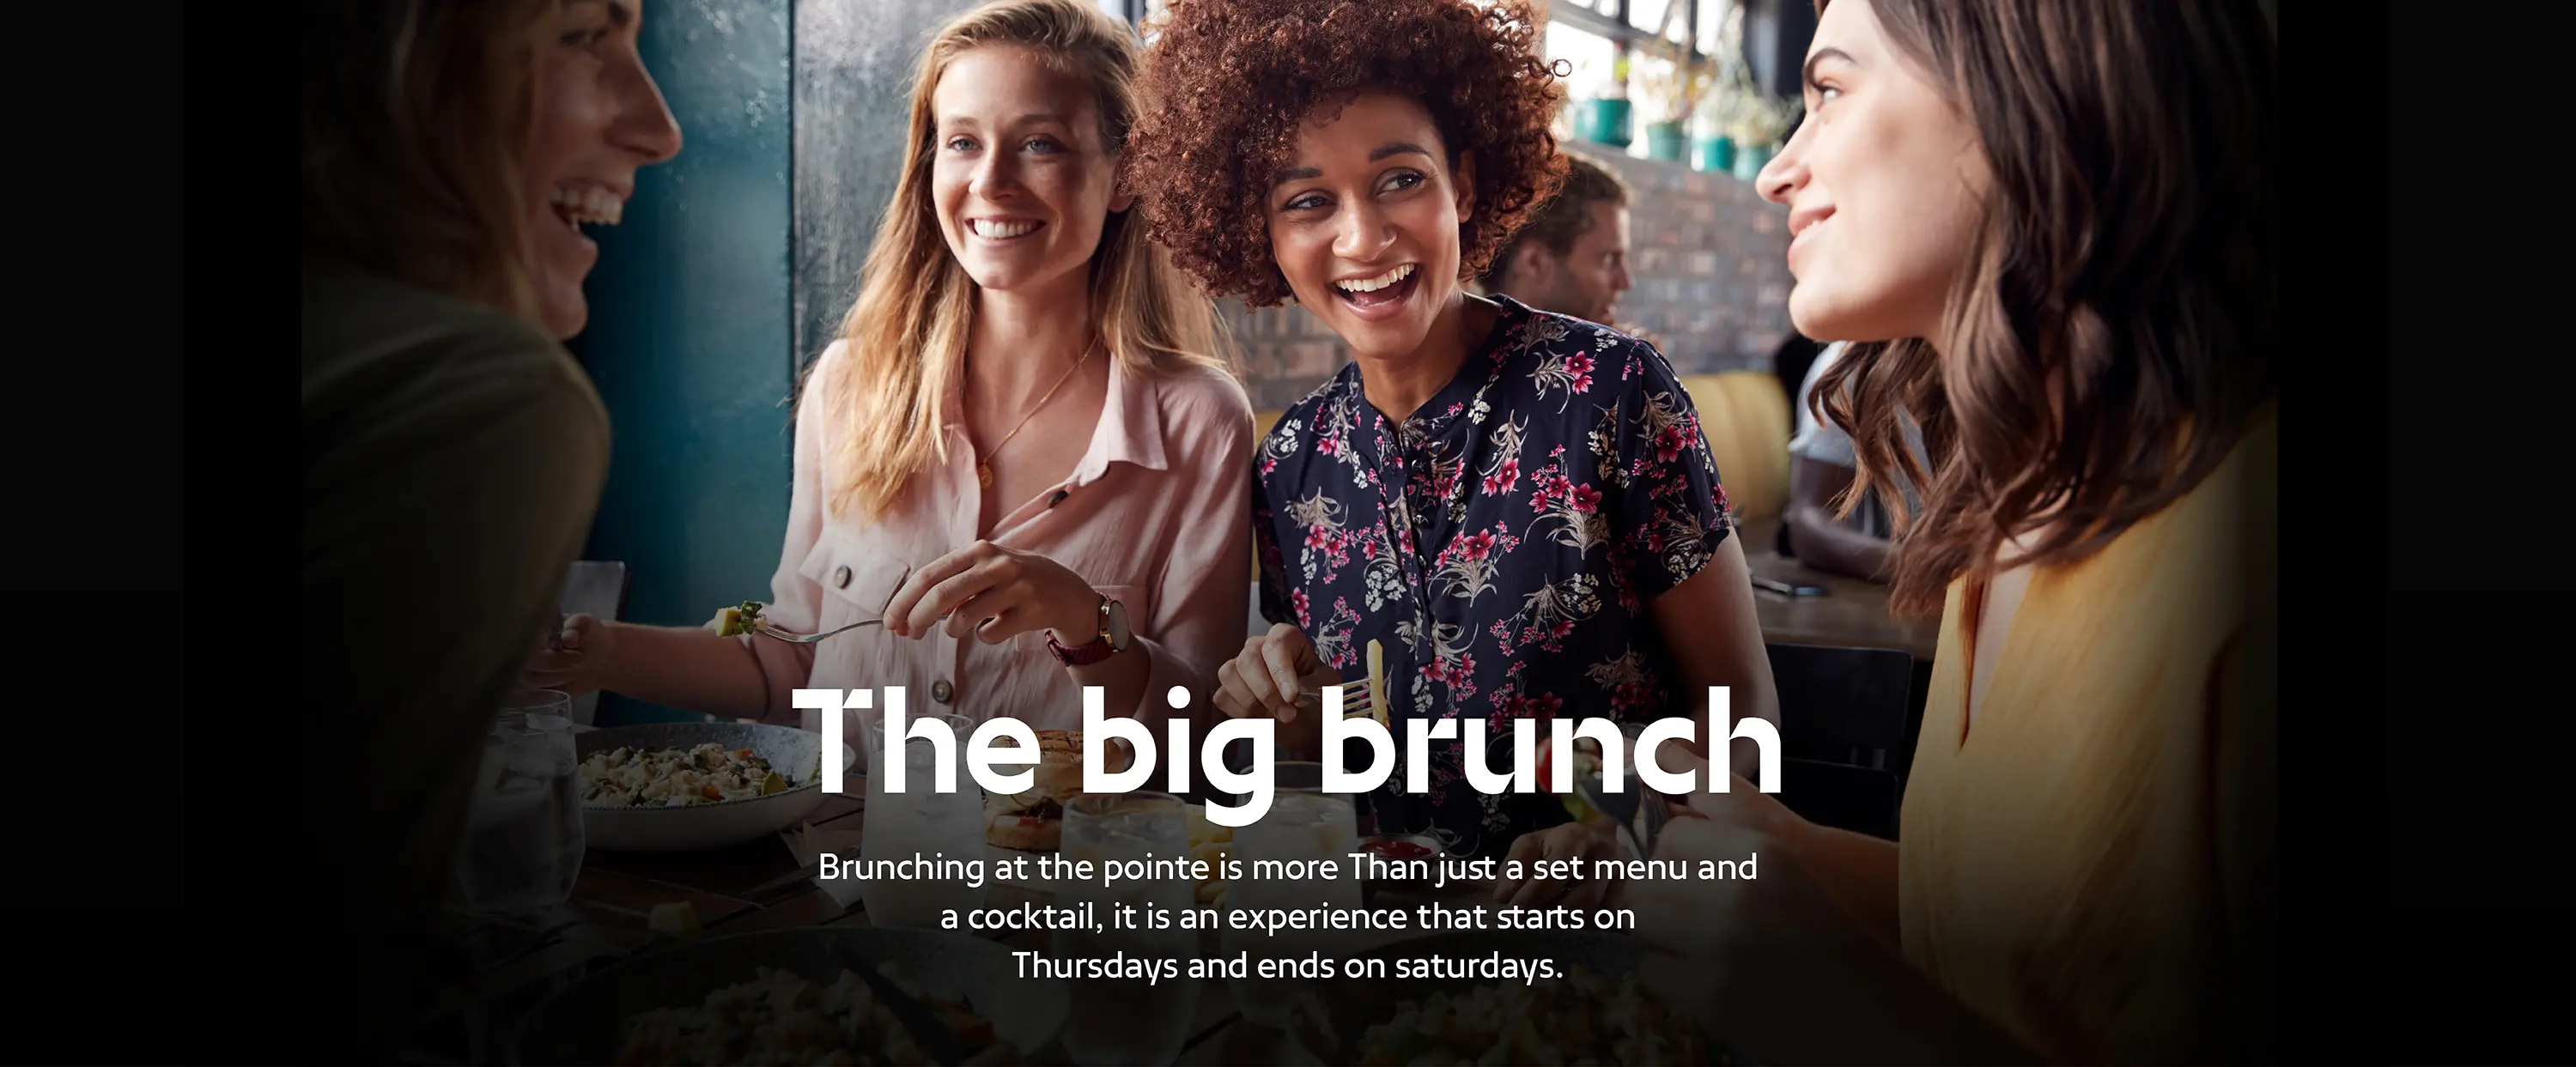 HERE COMES THE BIG BRUNCH!